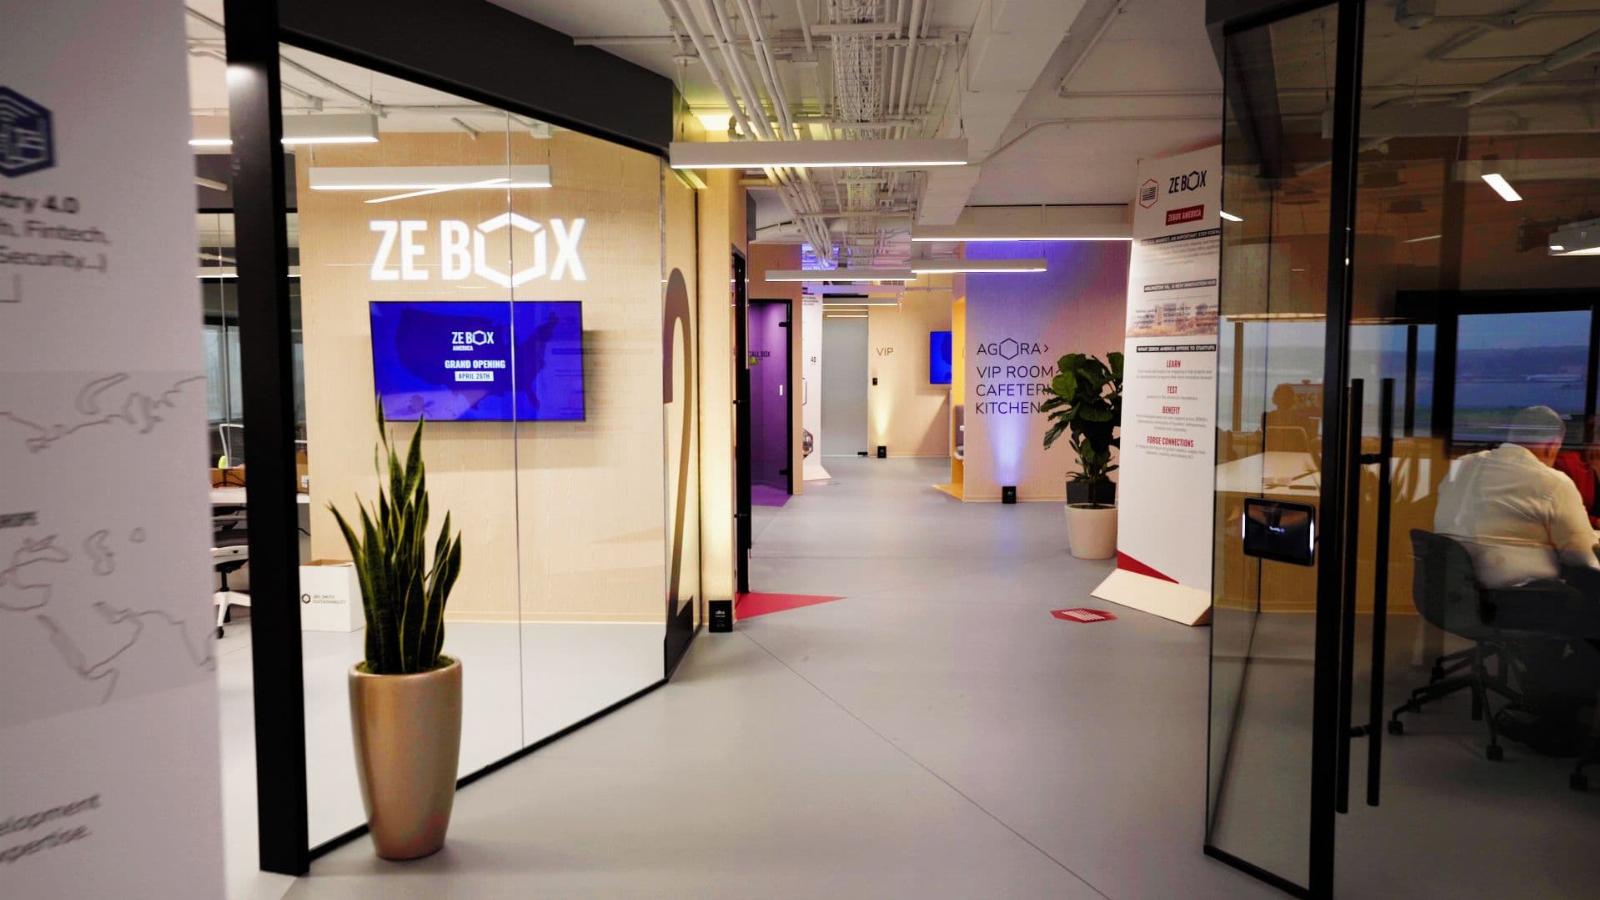 ZEBOX, an incubator for supply chain startups, launches its Asia hub in Singapore